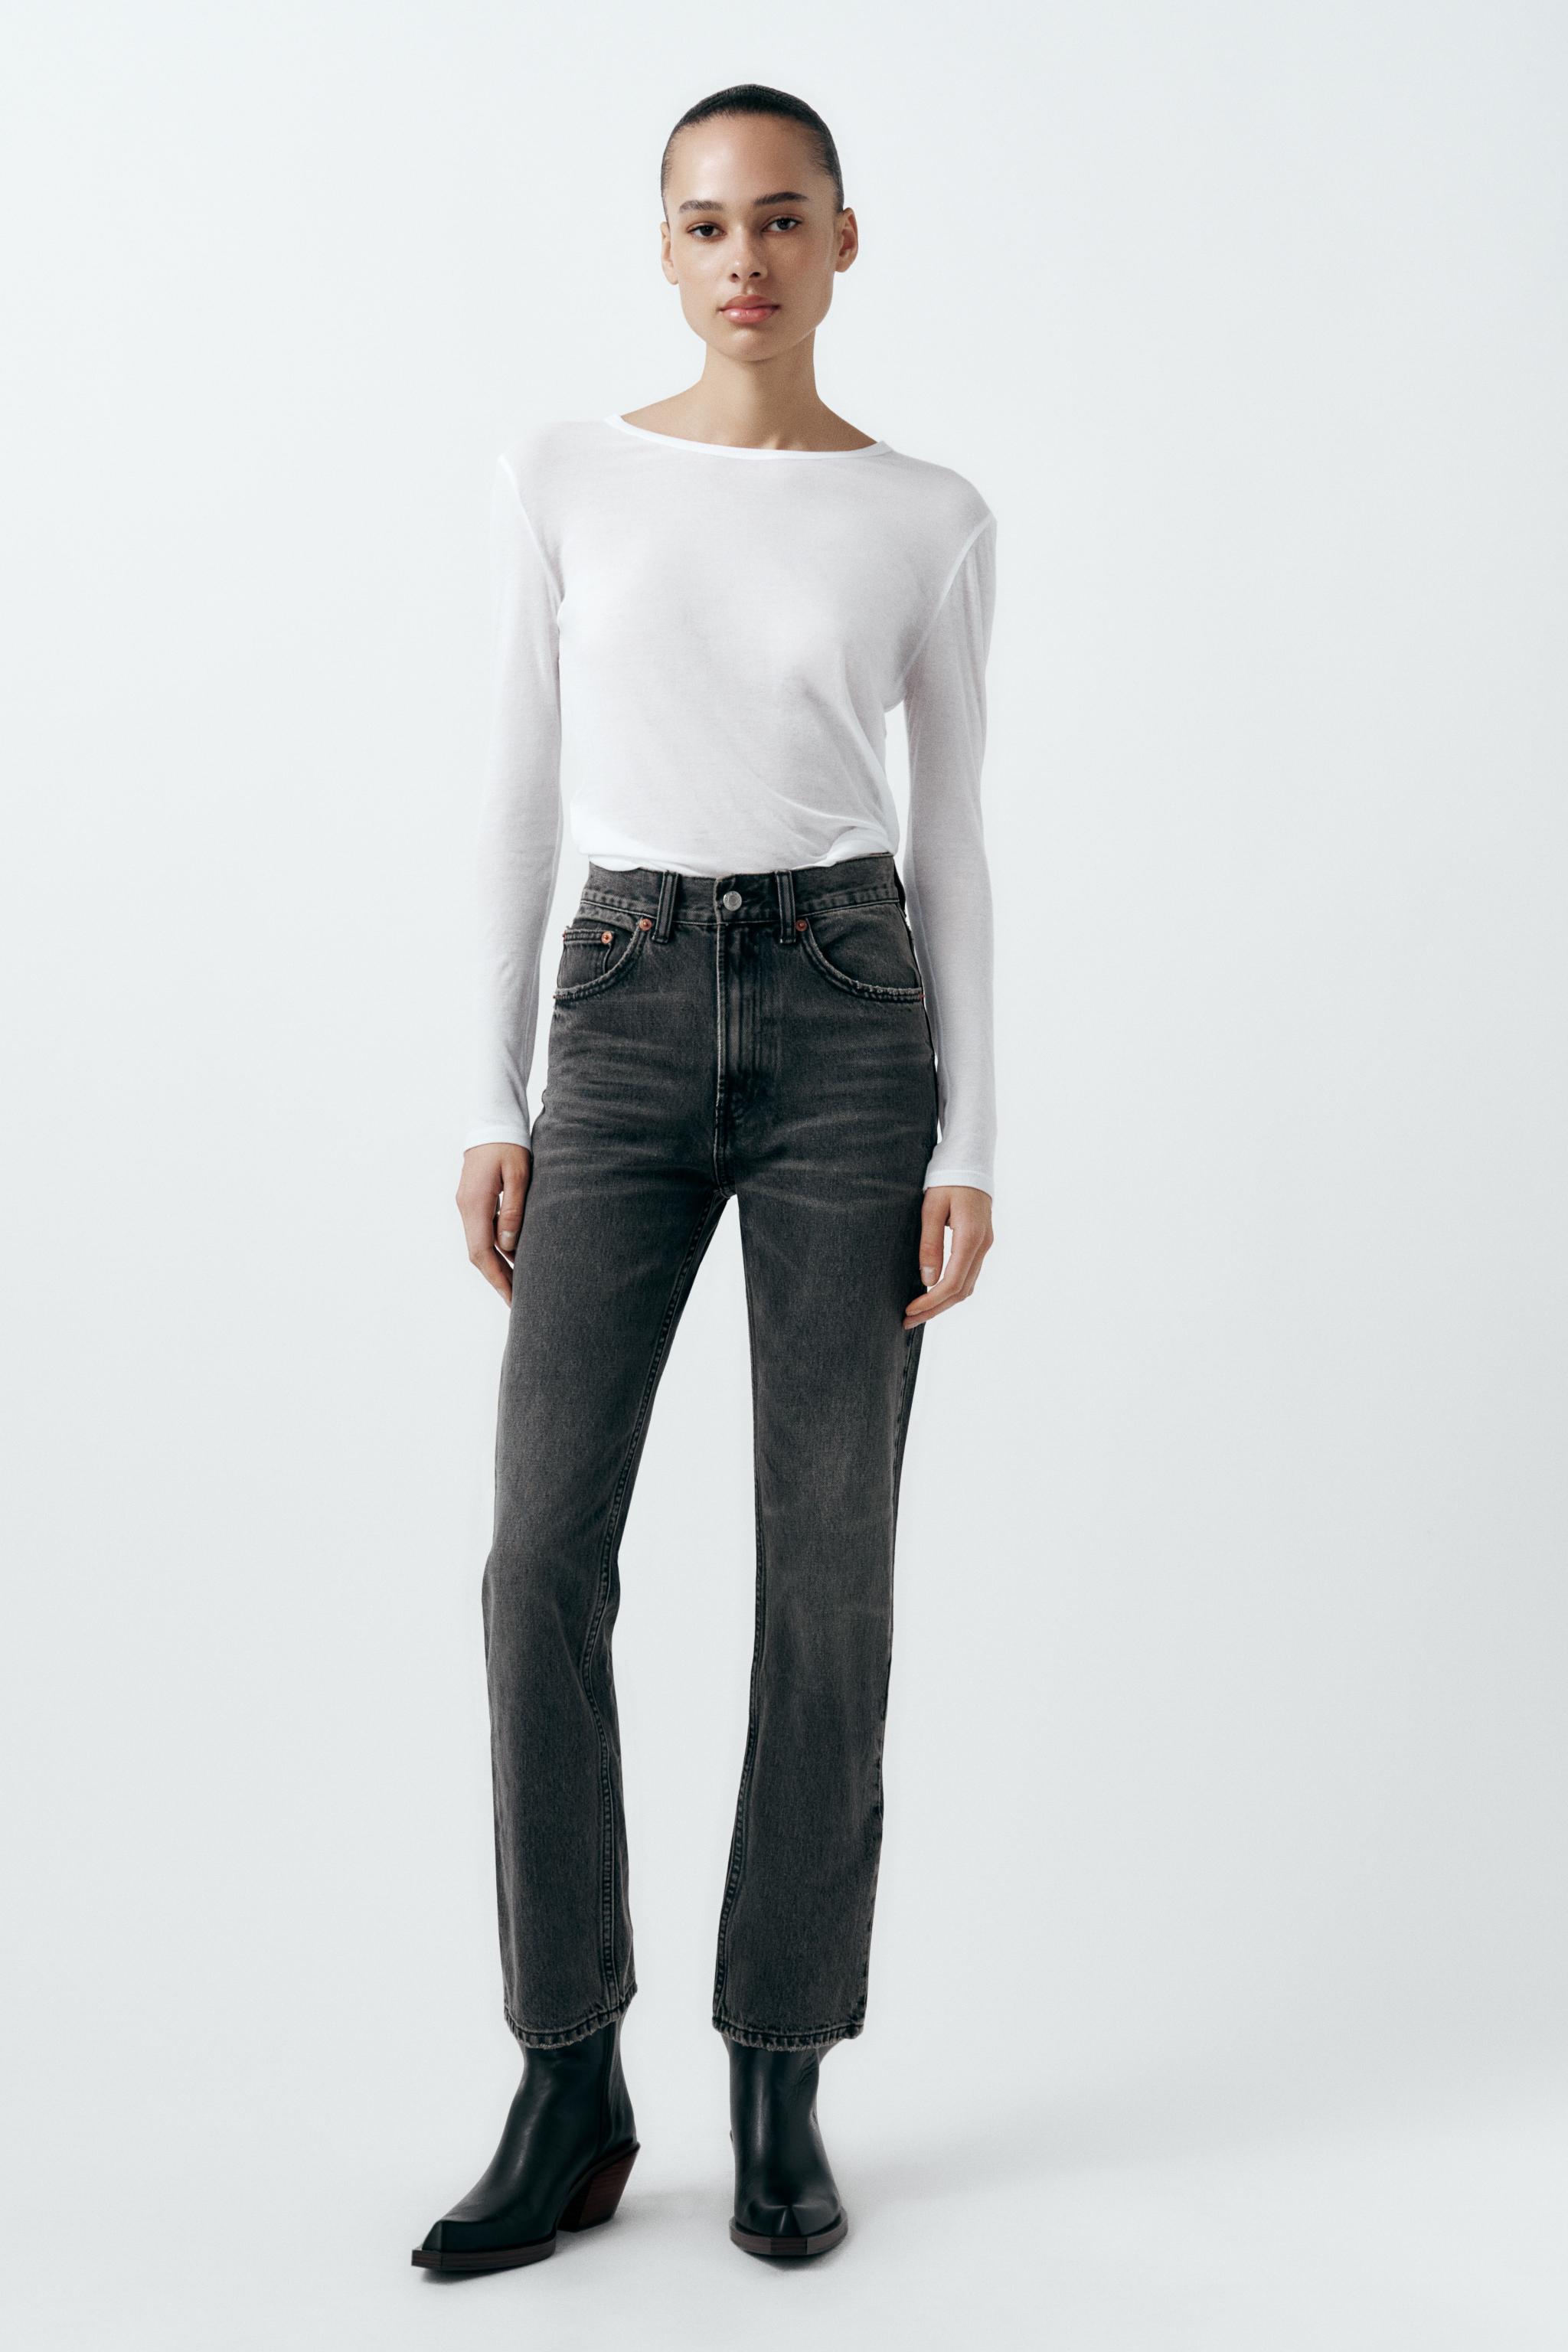 TRF STRAIGHT LEG JEANS WITH A HIGH WAIST - Anthracite grey